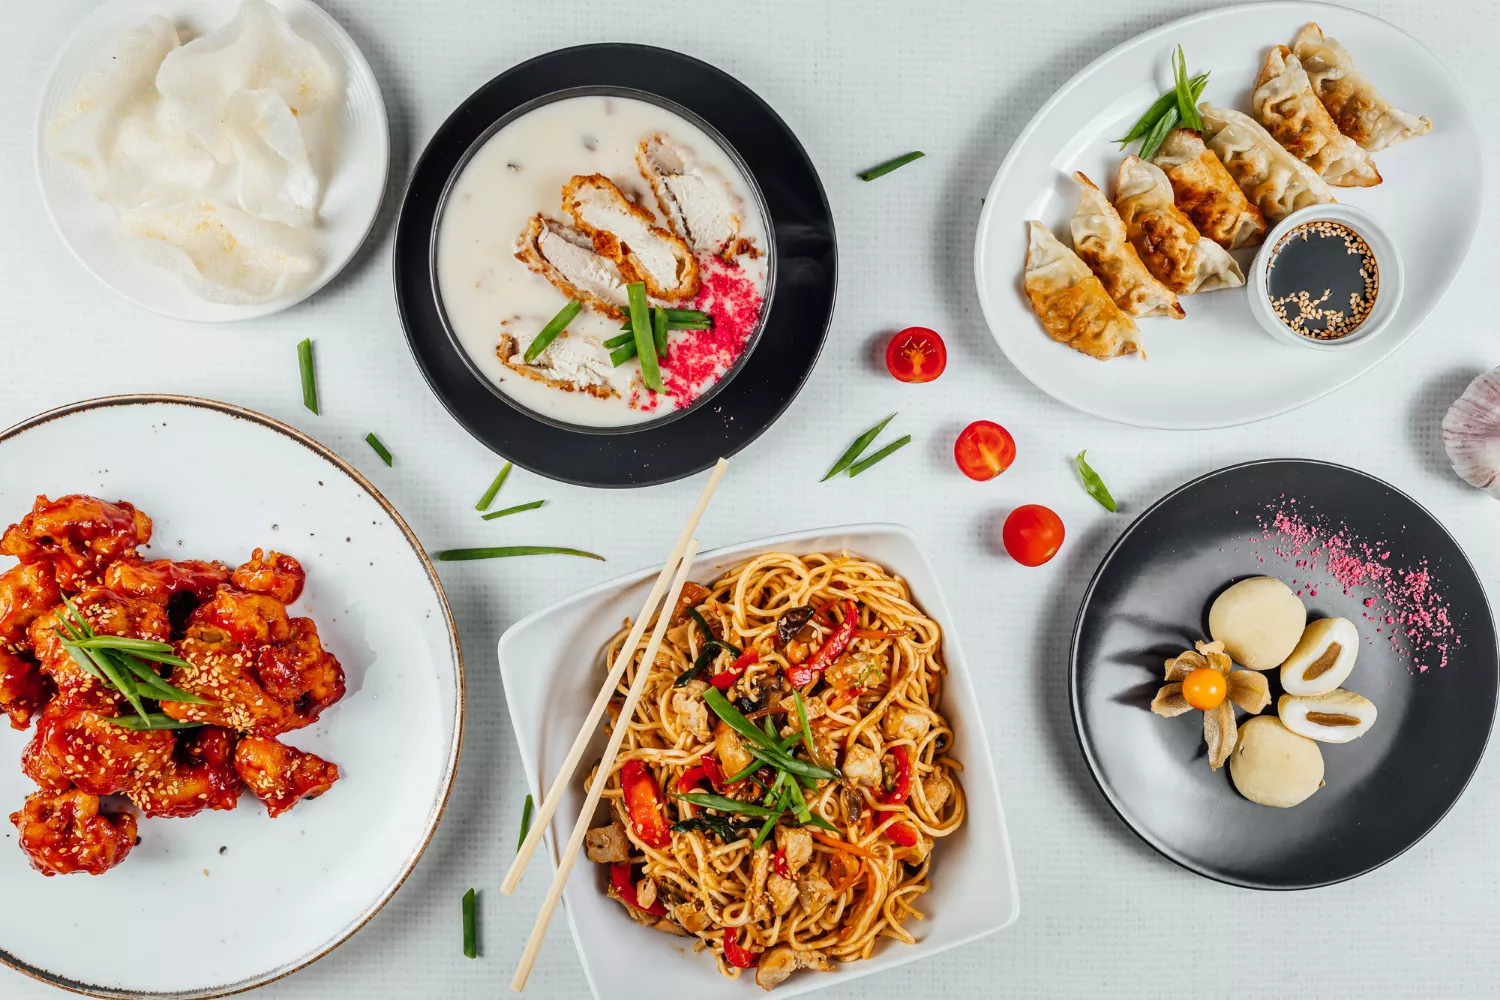 Catering to Your Dietary Preferences With Halal Chinese Food in Queens